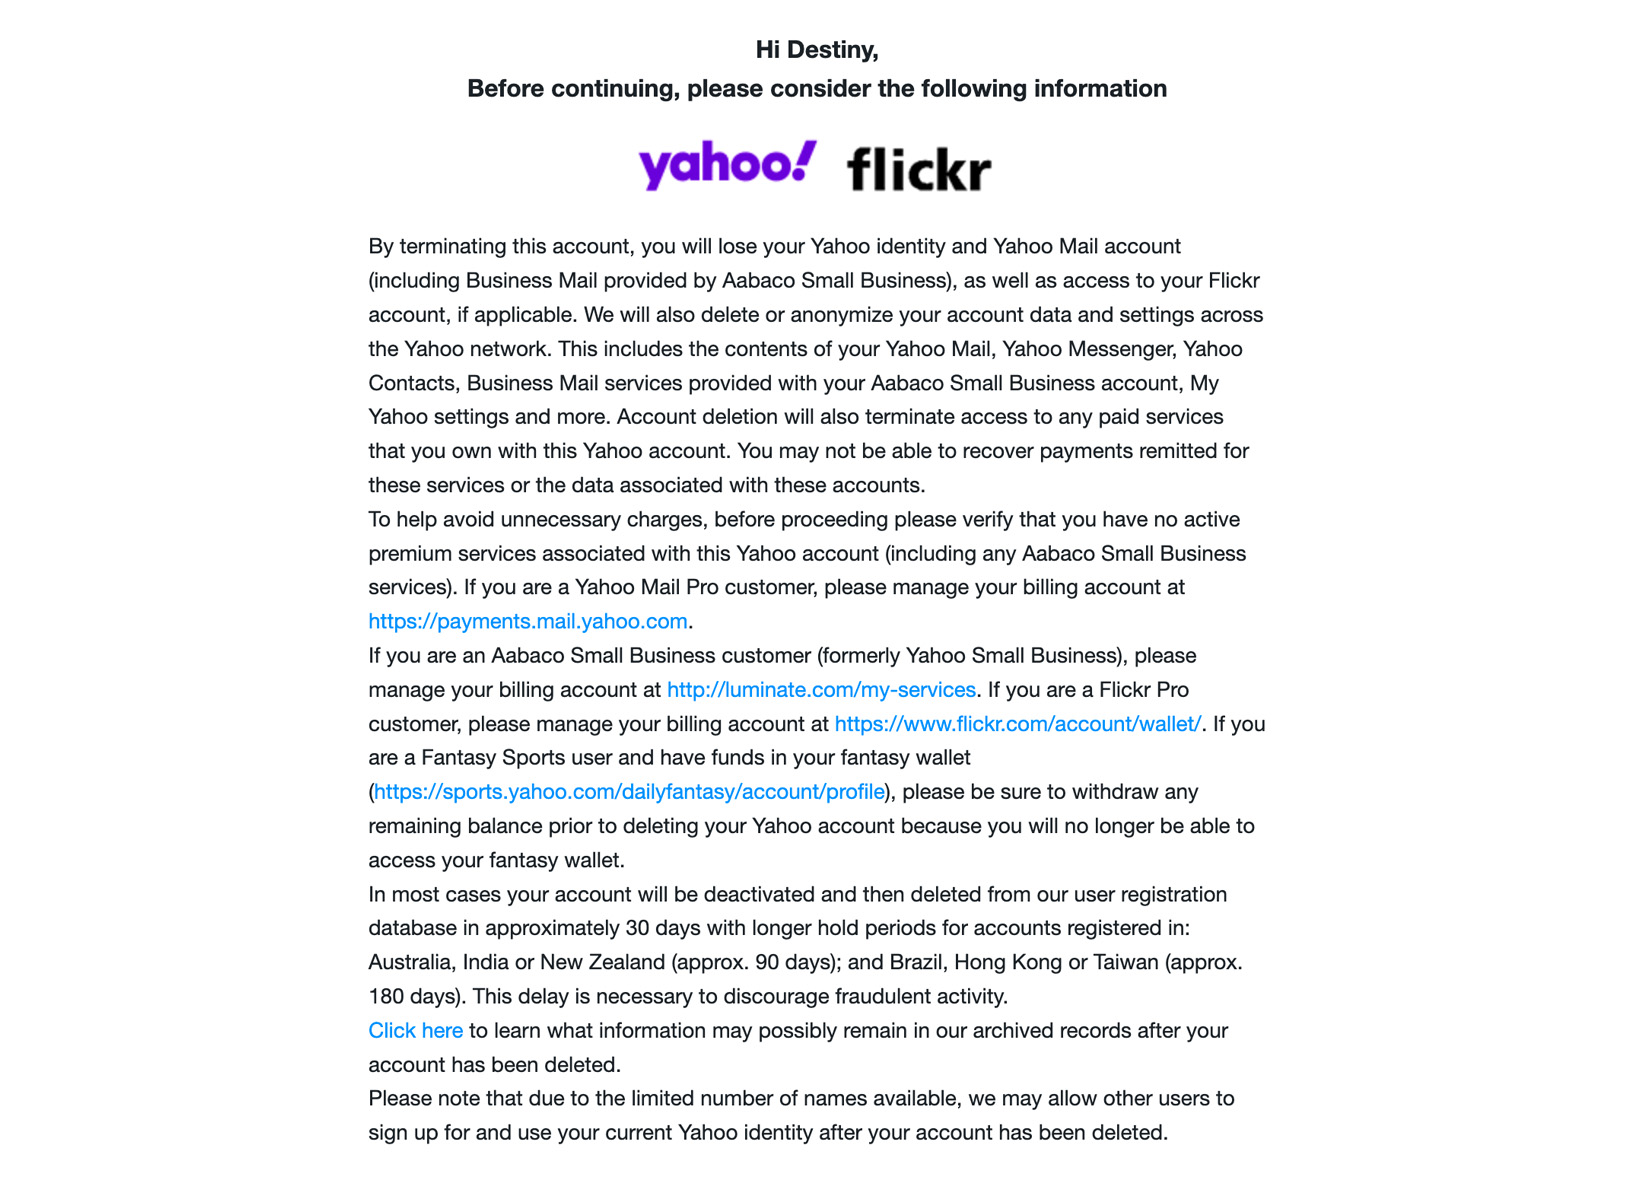 A view of Yahoo's offboarding screen. This screen asks the user to consider the following information and then shows a dense paragraph of legalese with embedded links. 